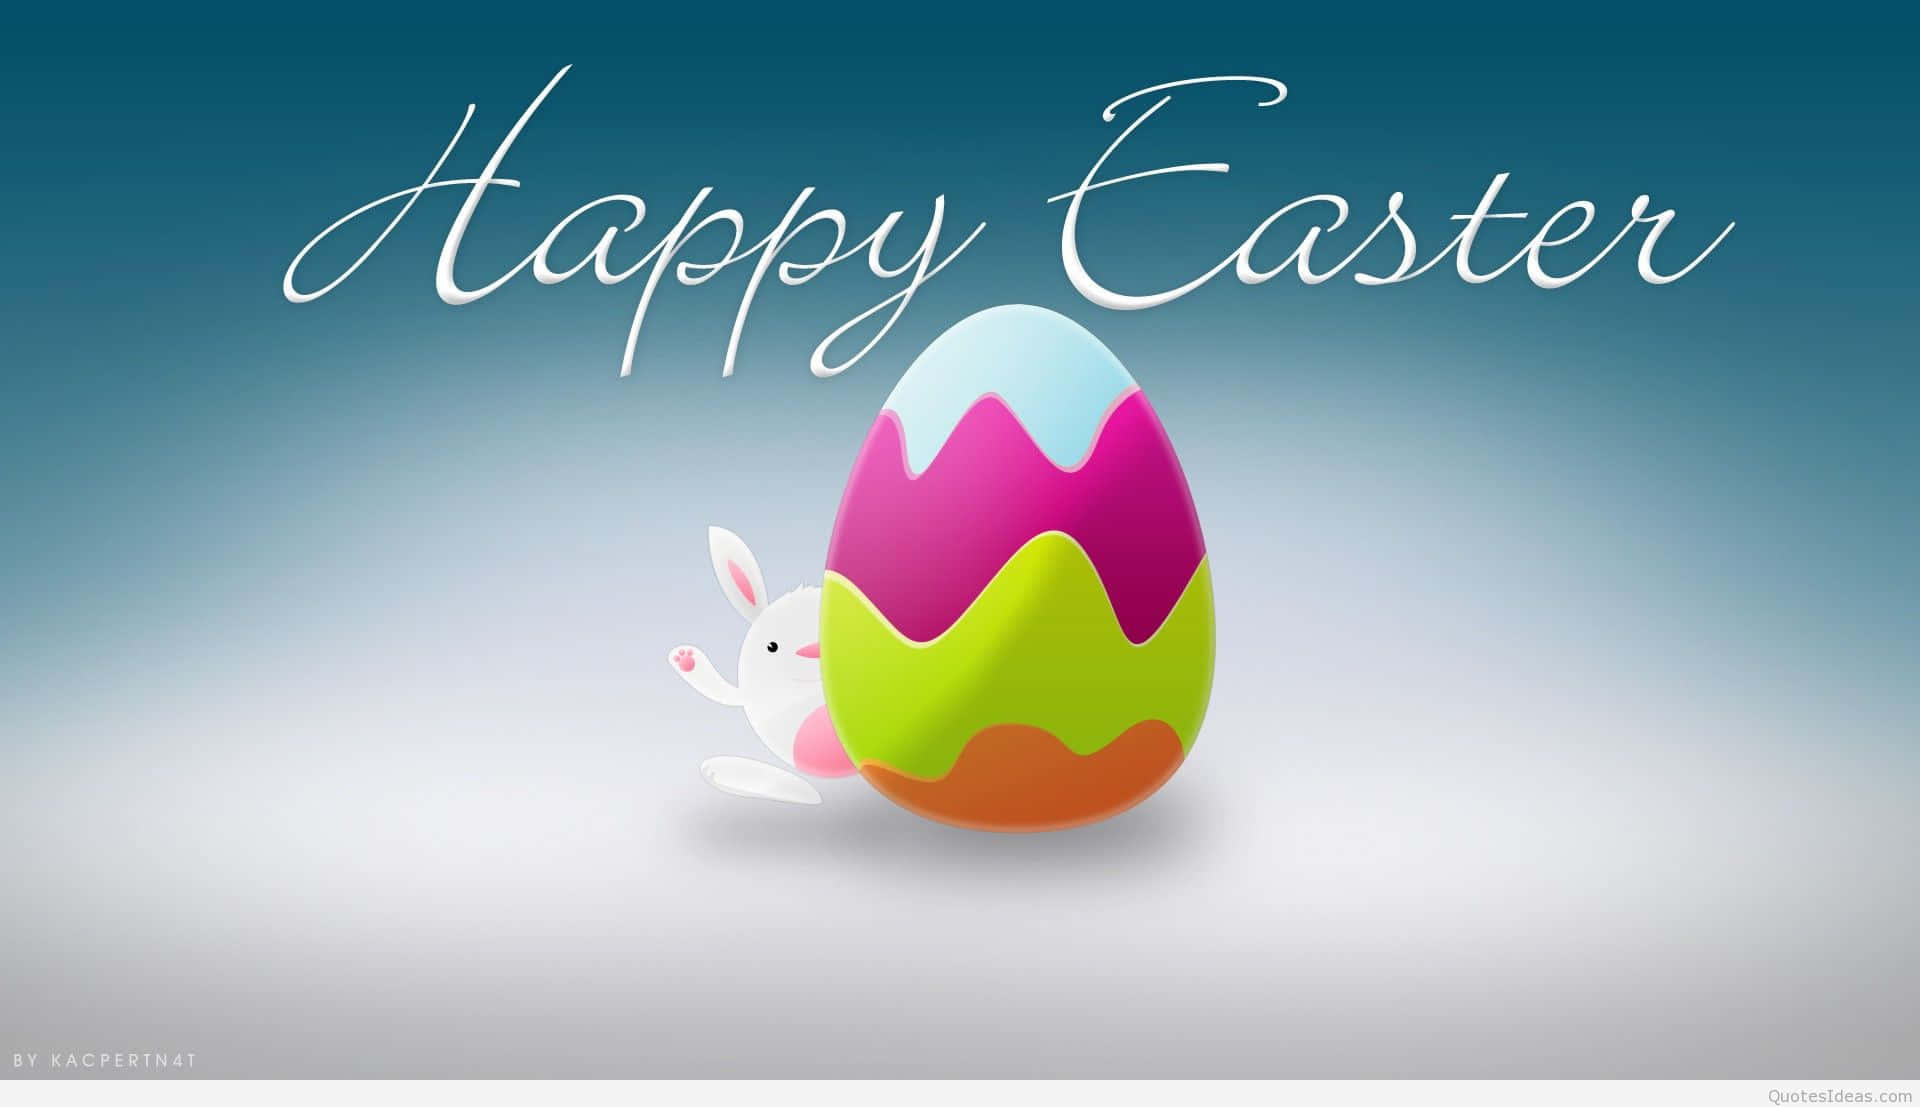 Celebrate Easter with this Cute Happy Easter image! Wallpaper